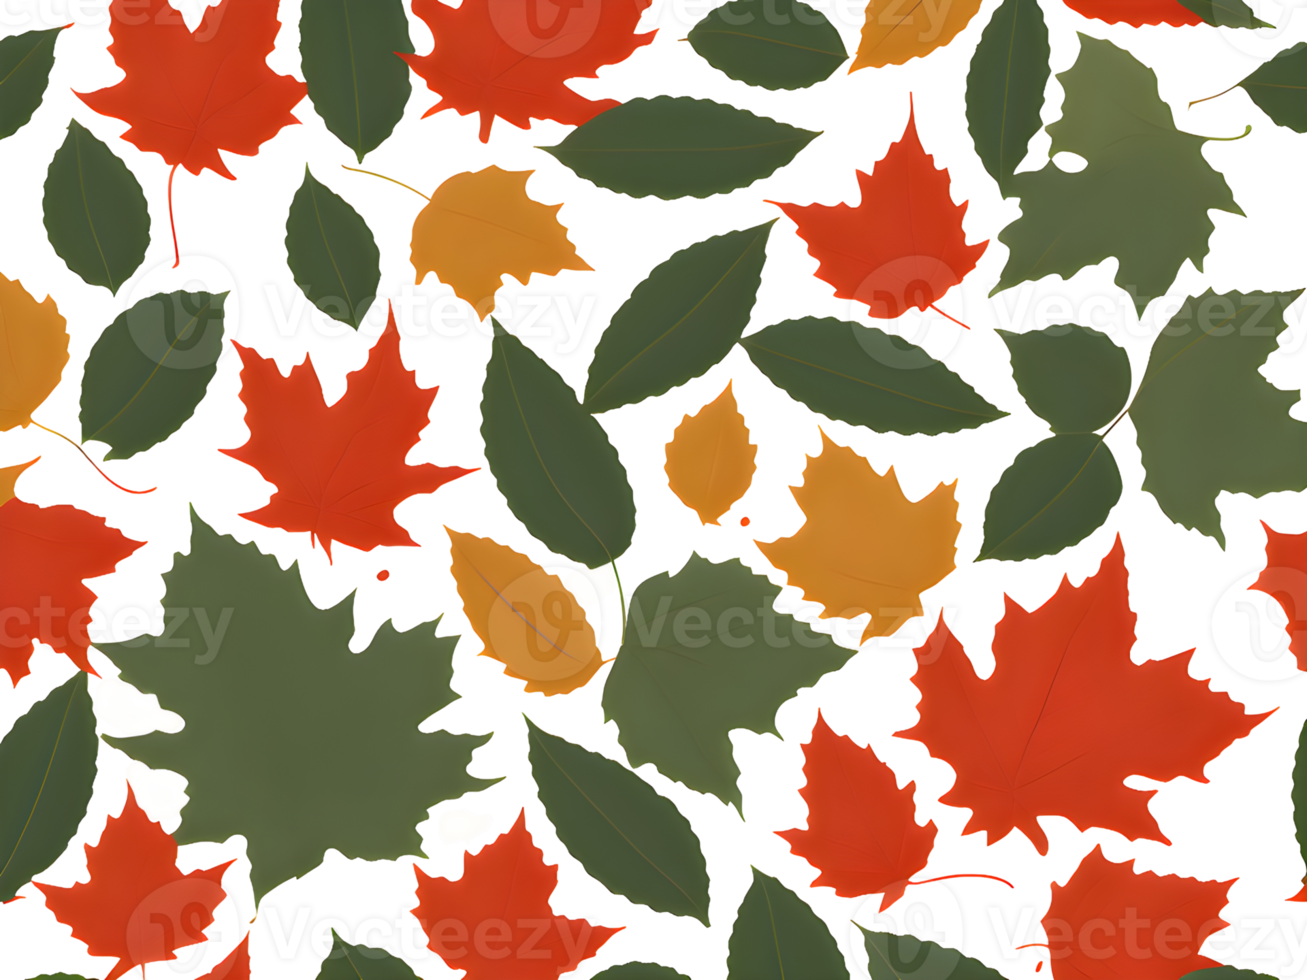 group of different colored leaves. autumn leaves background. leafs falling. pattern design. png